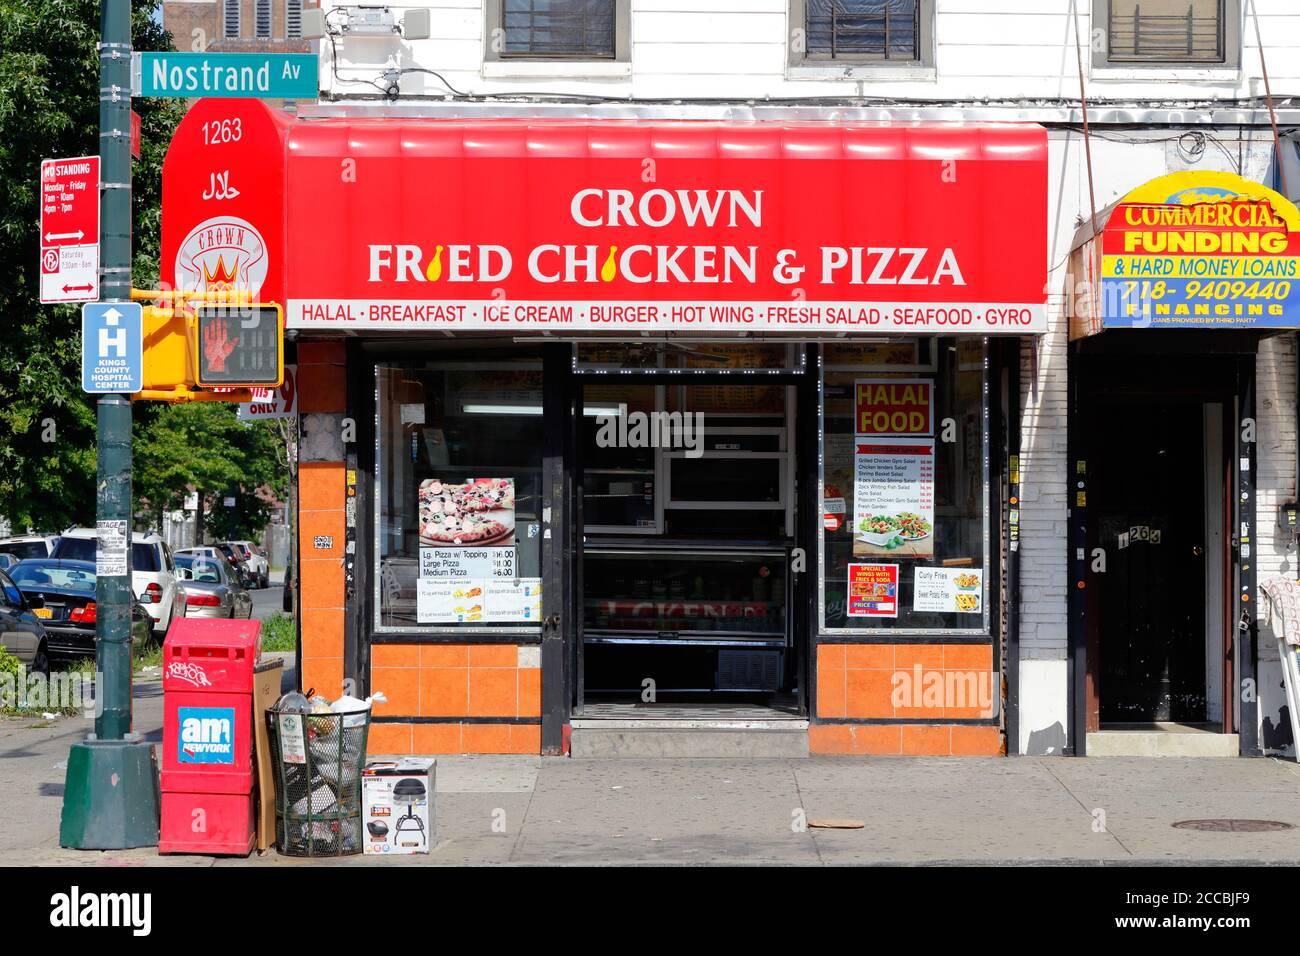 Crown Fried Chicken & Pizza, 1263 Nostrand Ave, Brooklyn, New York. NYC storefront photo of a fried chicken chain restaurant in Prospect Lefferts Gard Stock Photo